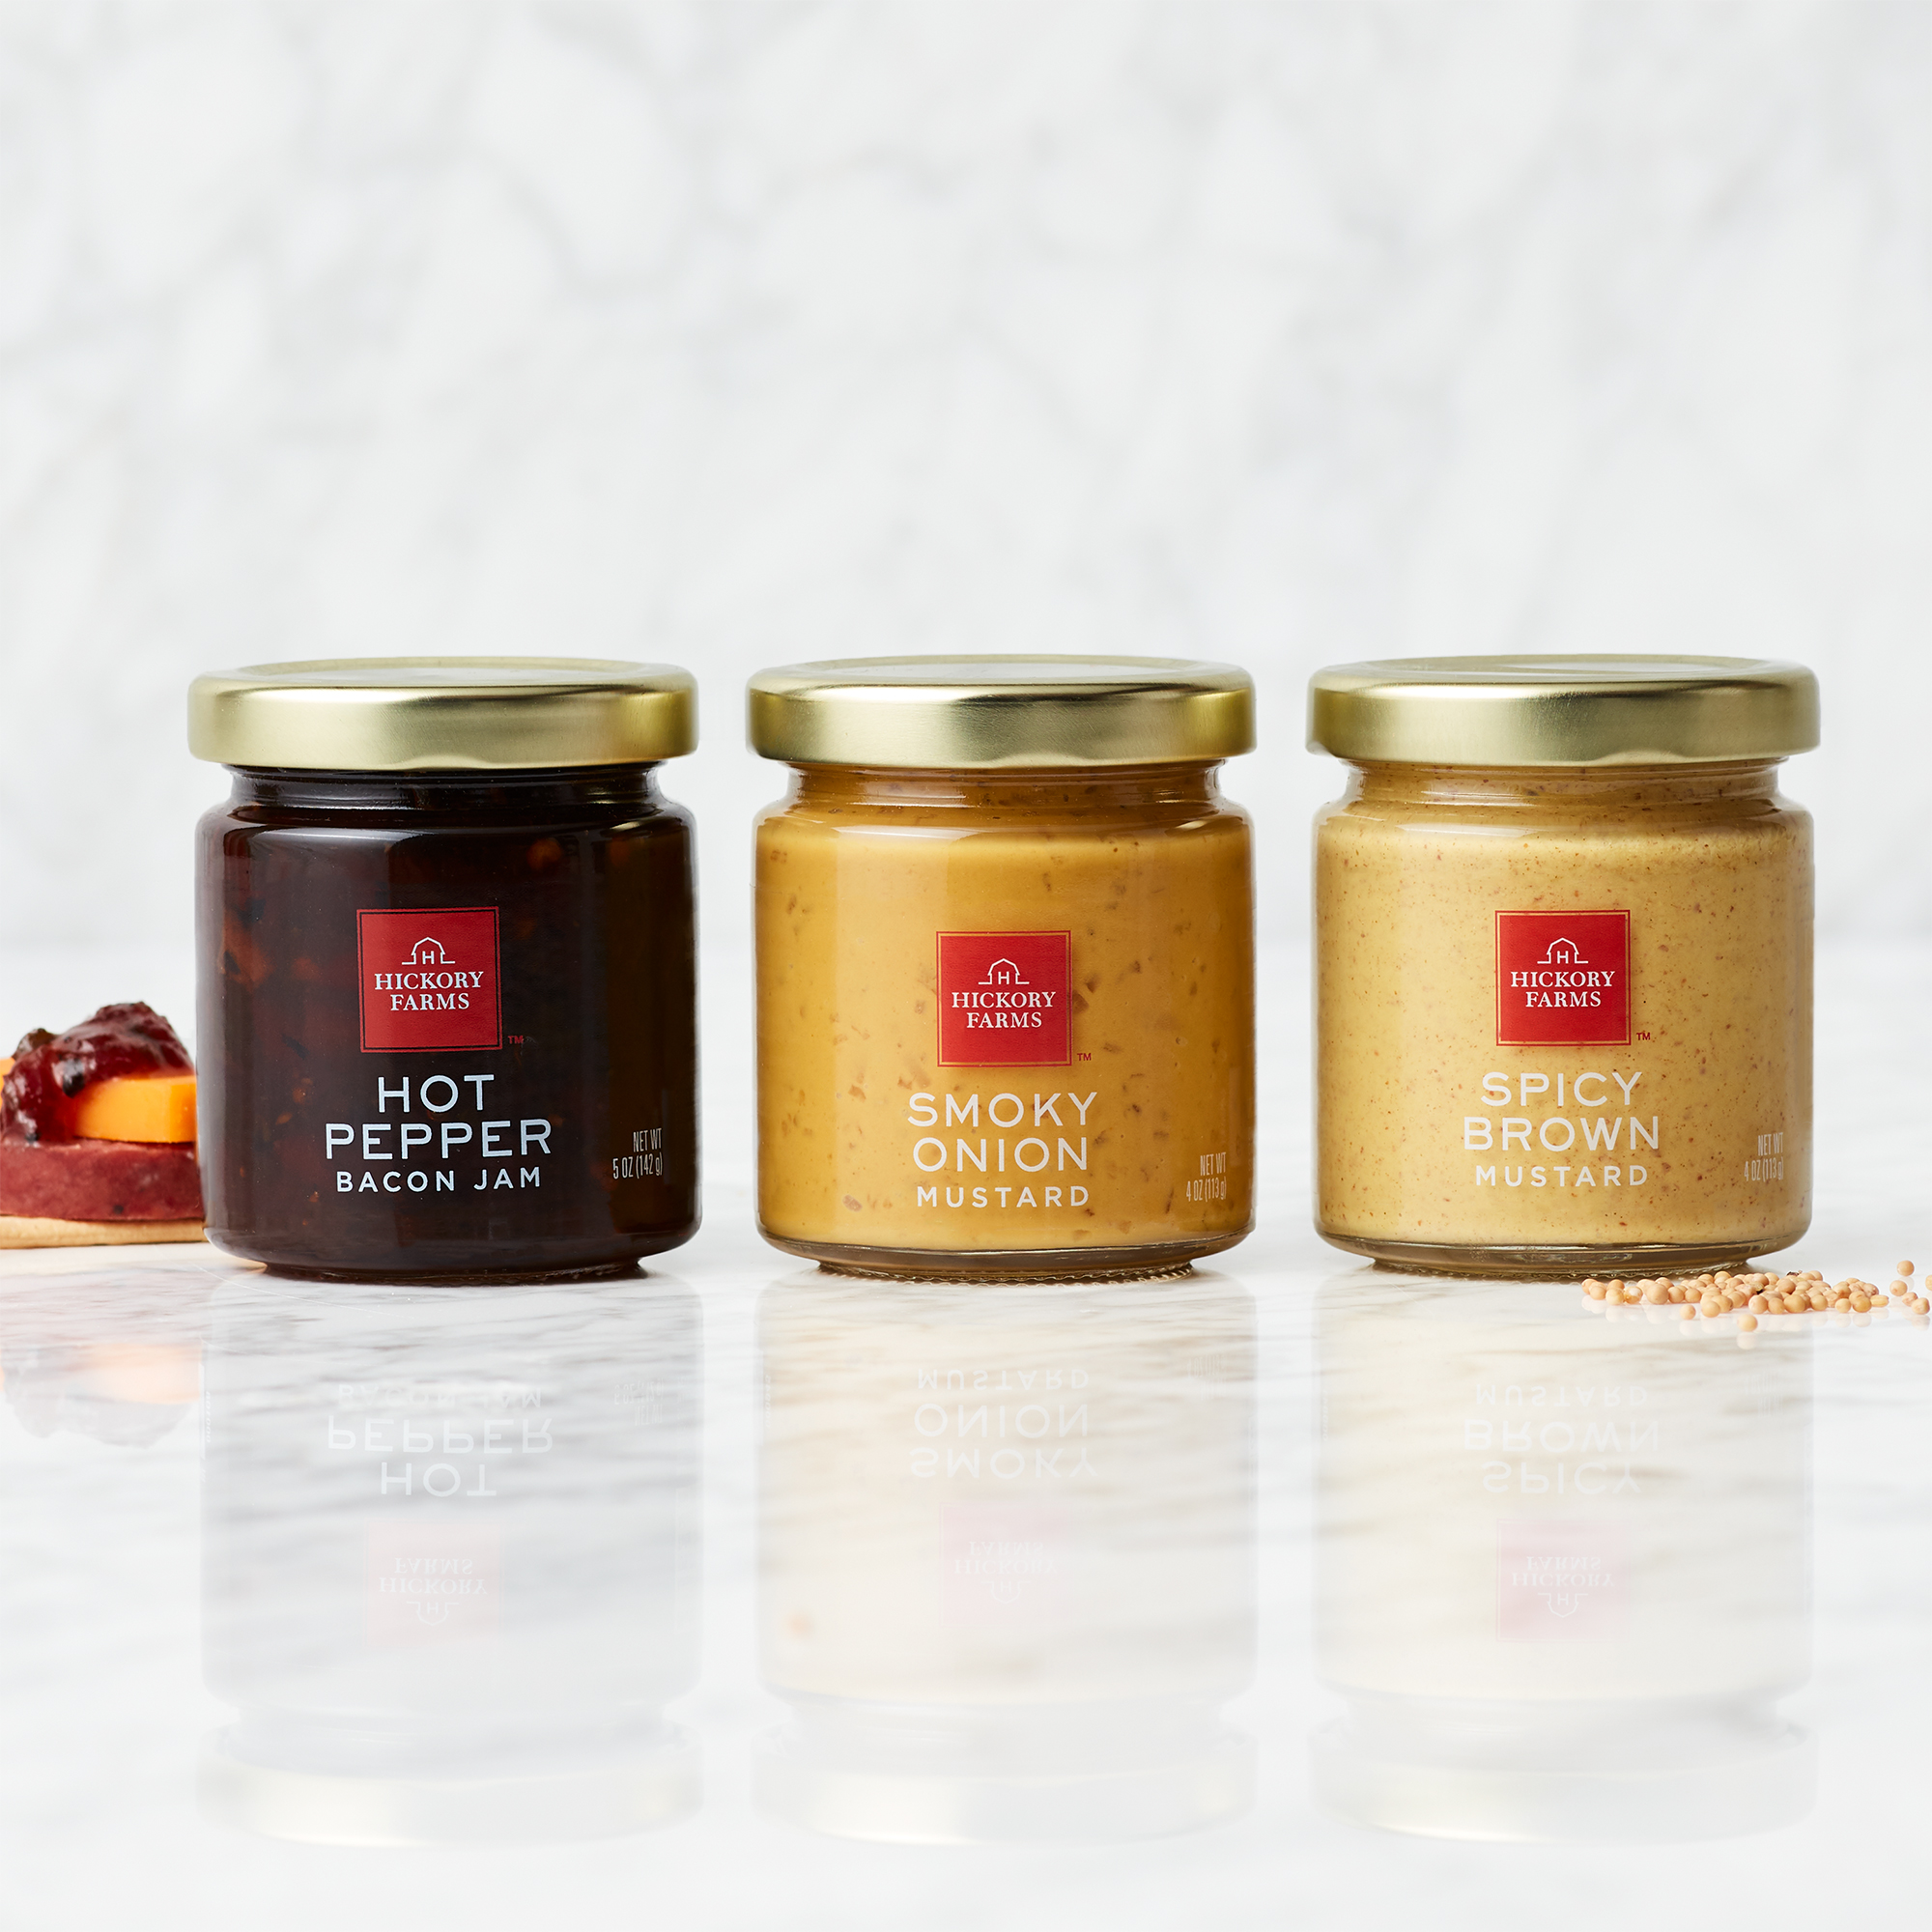 Hickory Farms - Tomorrow is National Mustard Day! Don't forget to